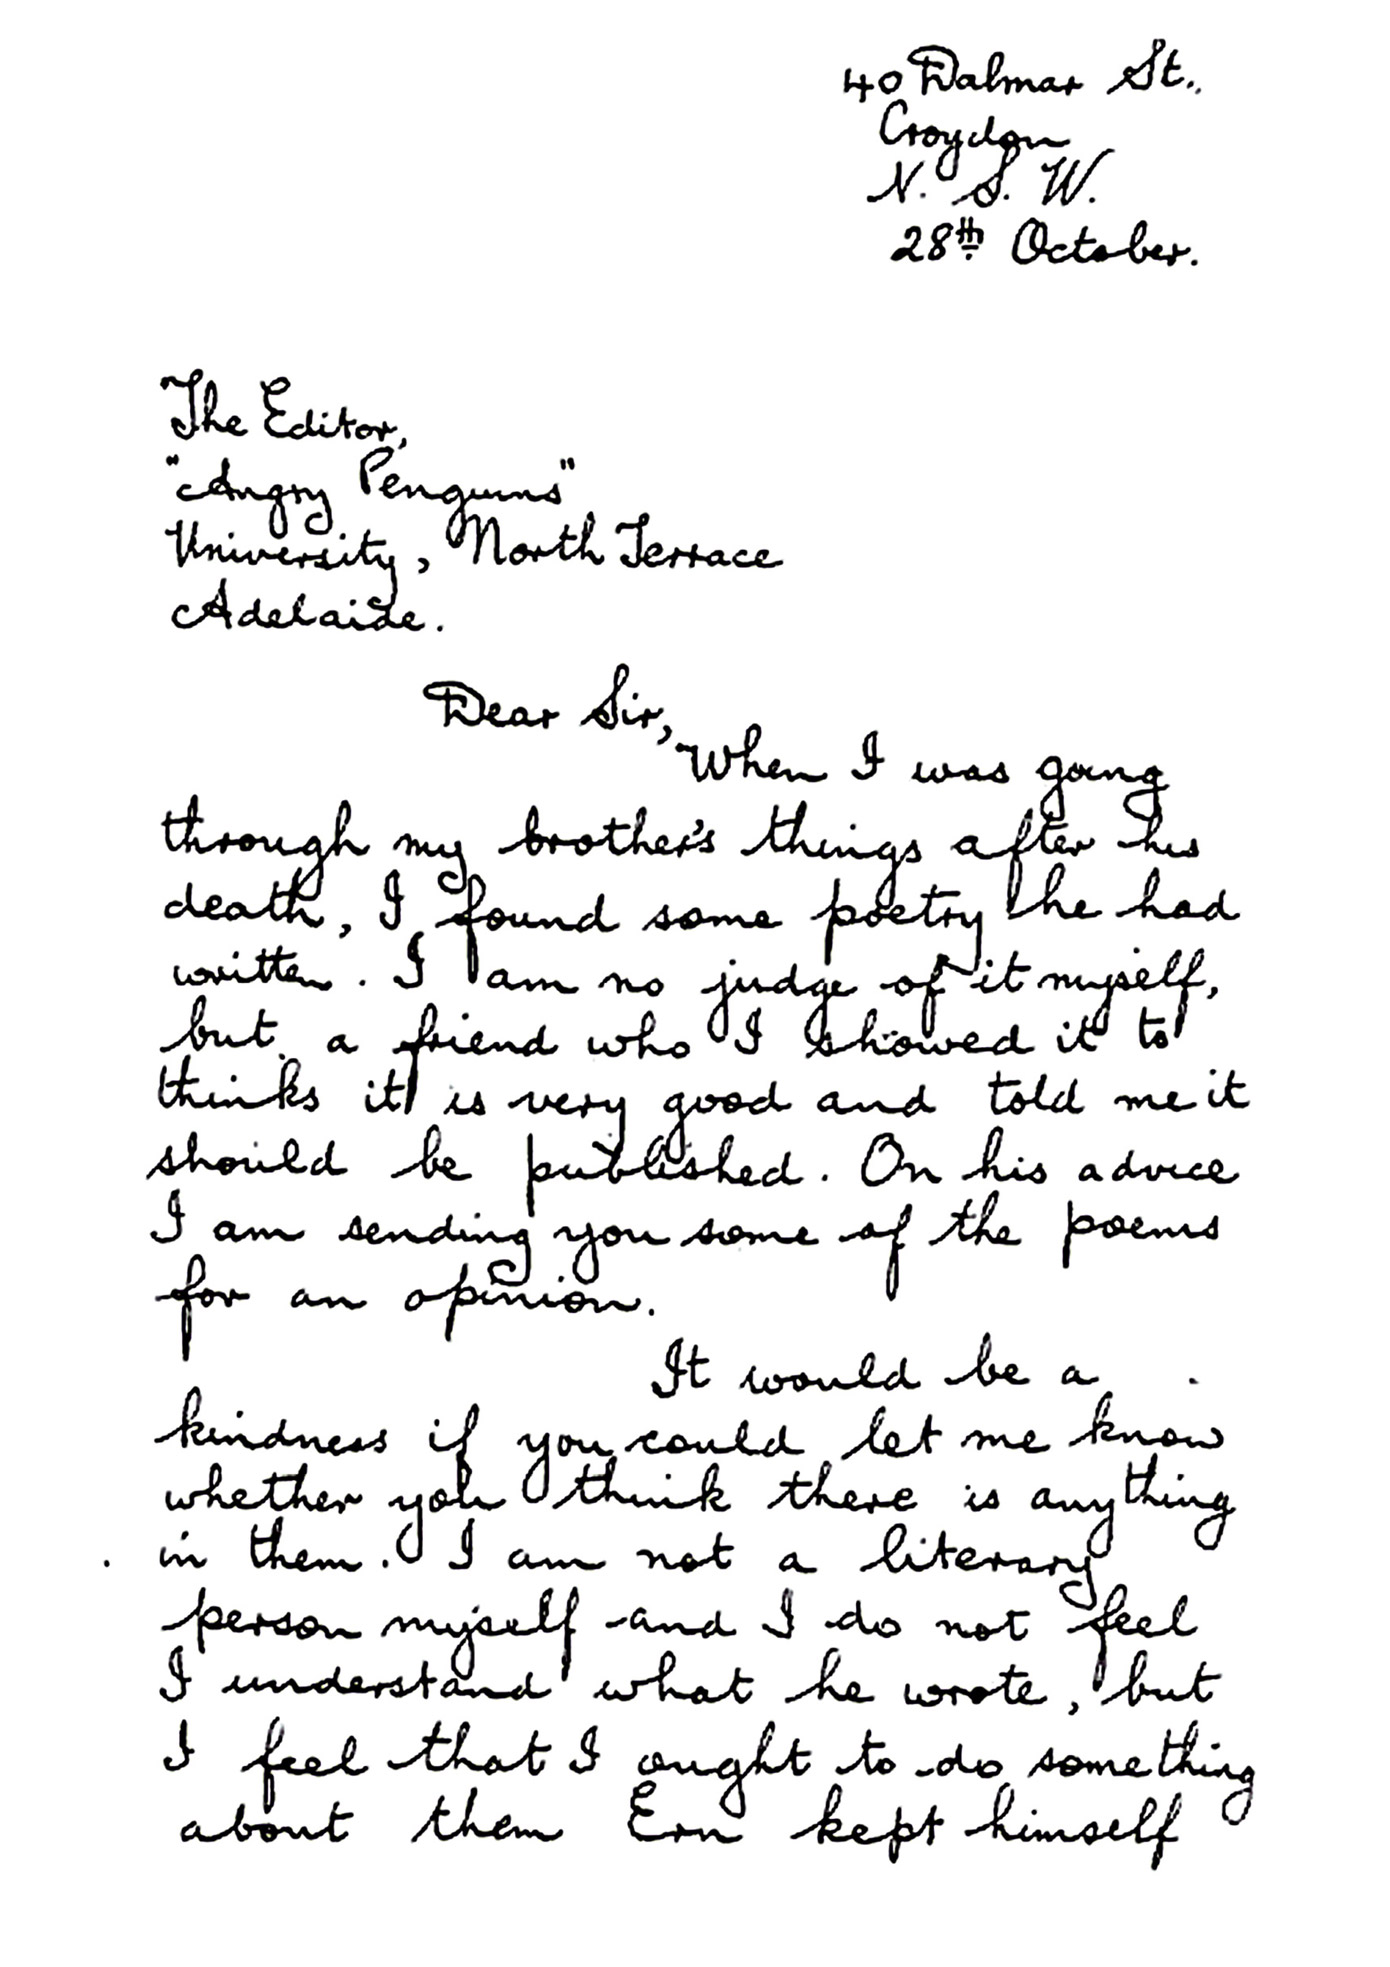 A scan of Ethel Malley’s 1943 letter to Max Harris. 